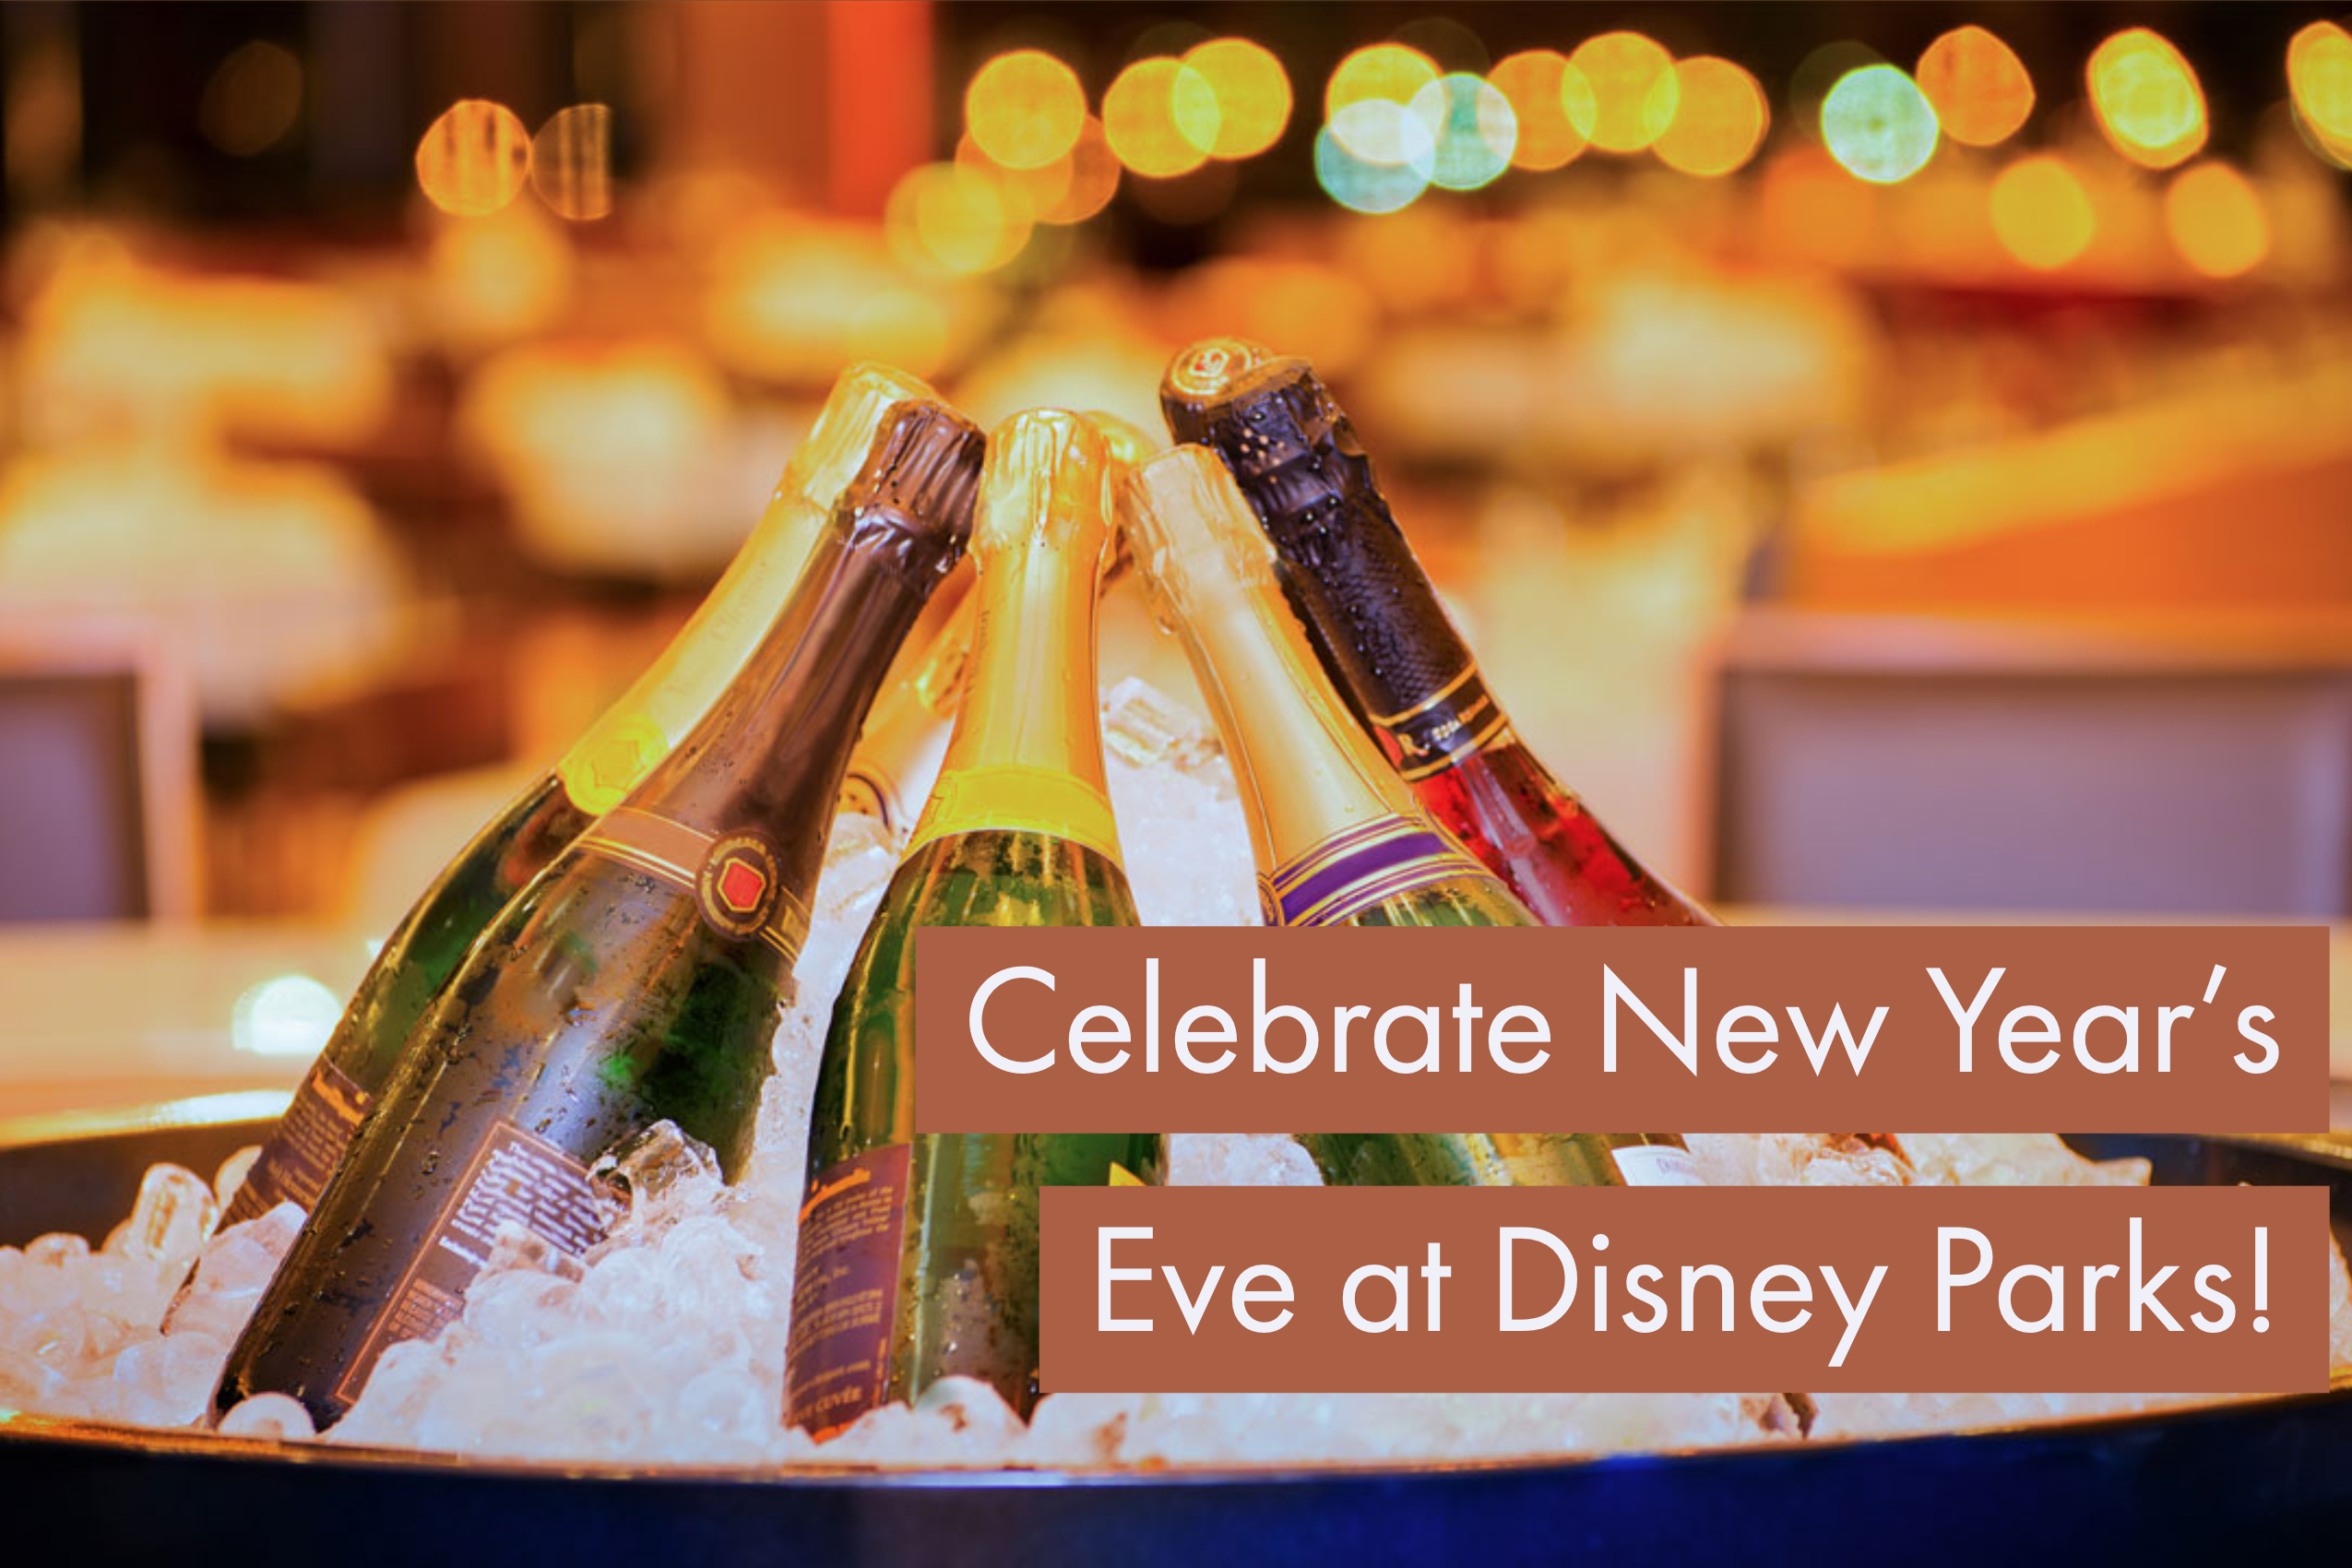 Your Personal Guide to Entertainment at the Disneyland Resort for New Year’s Eve